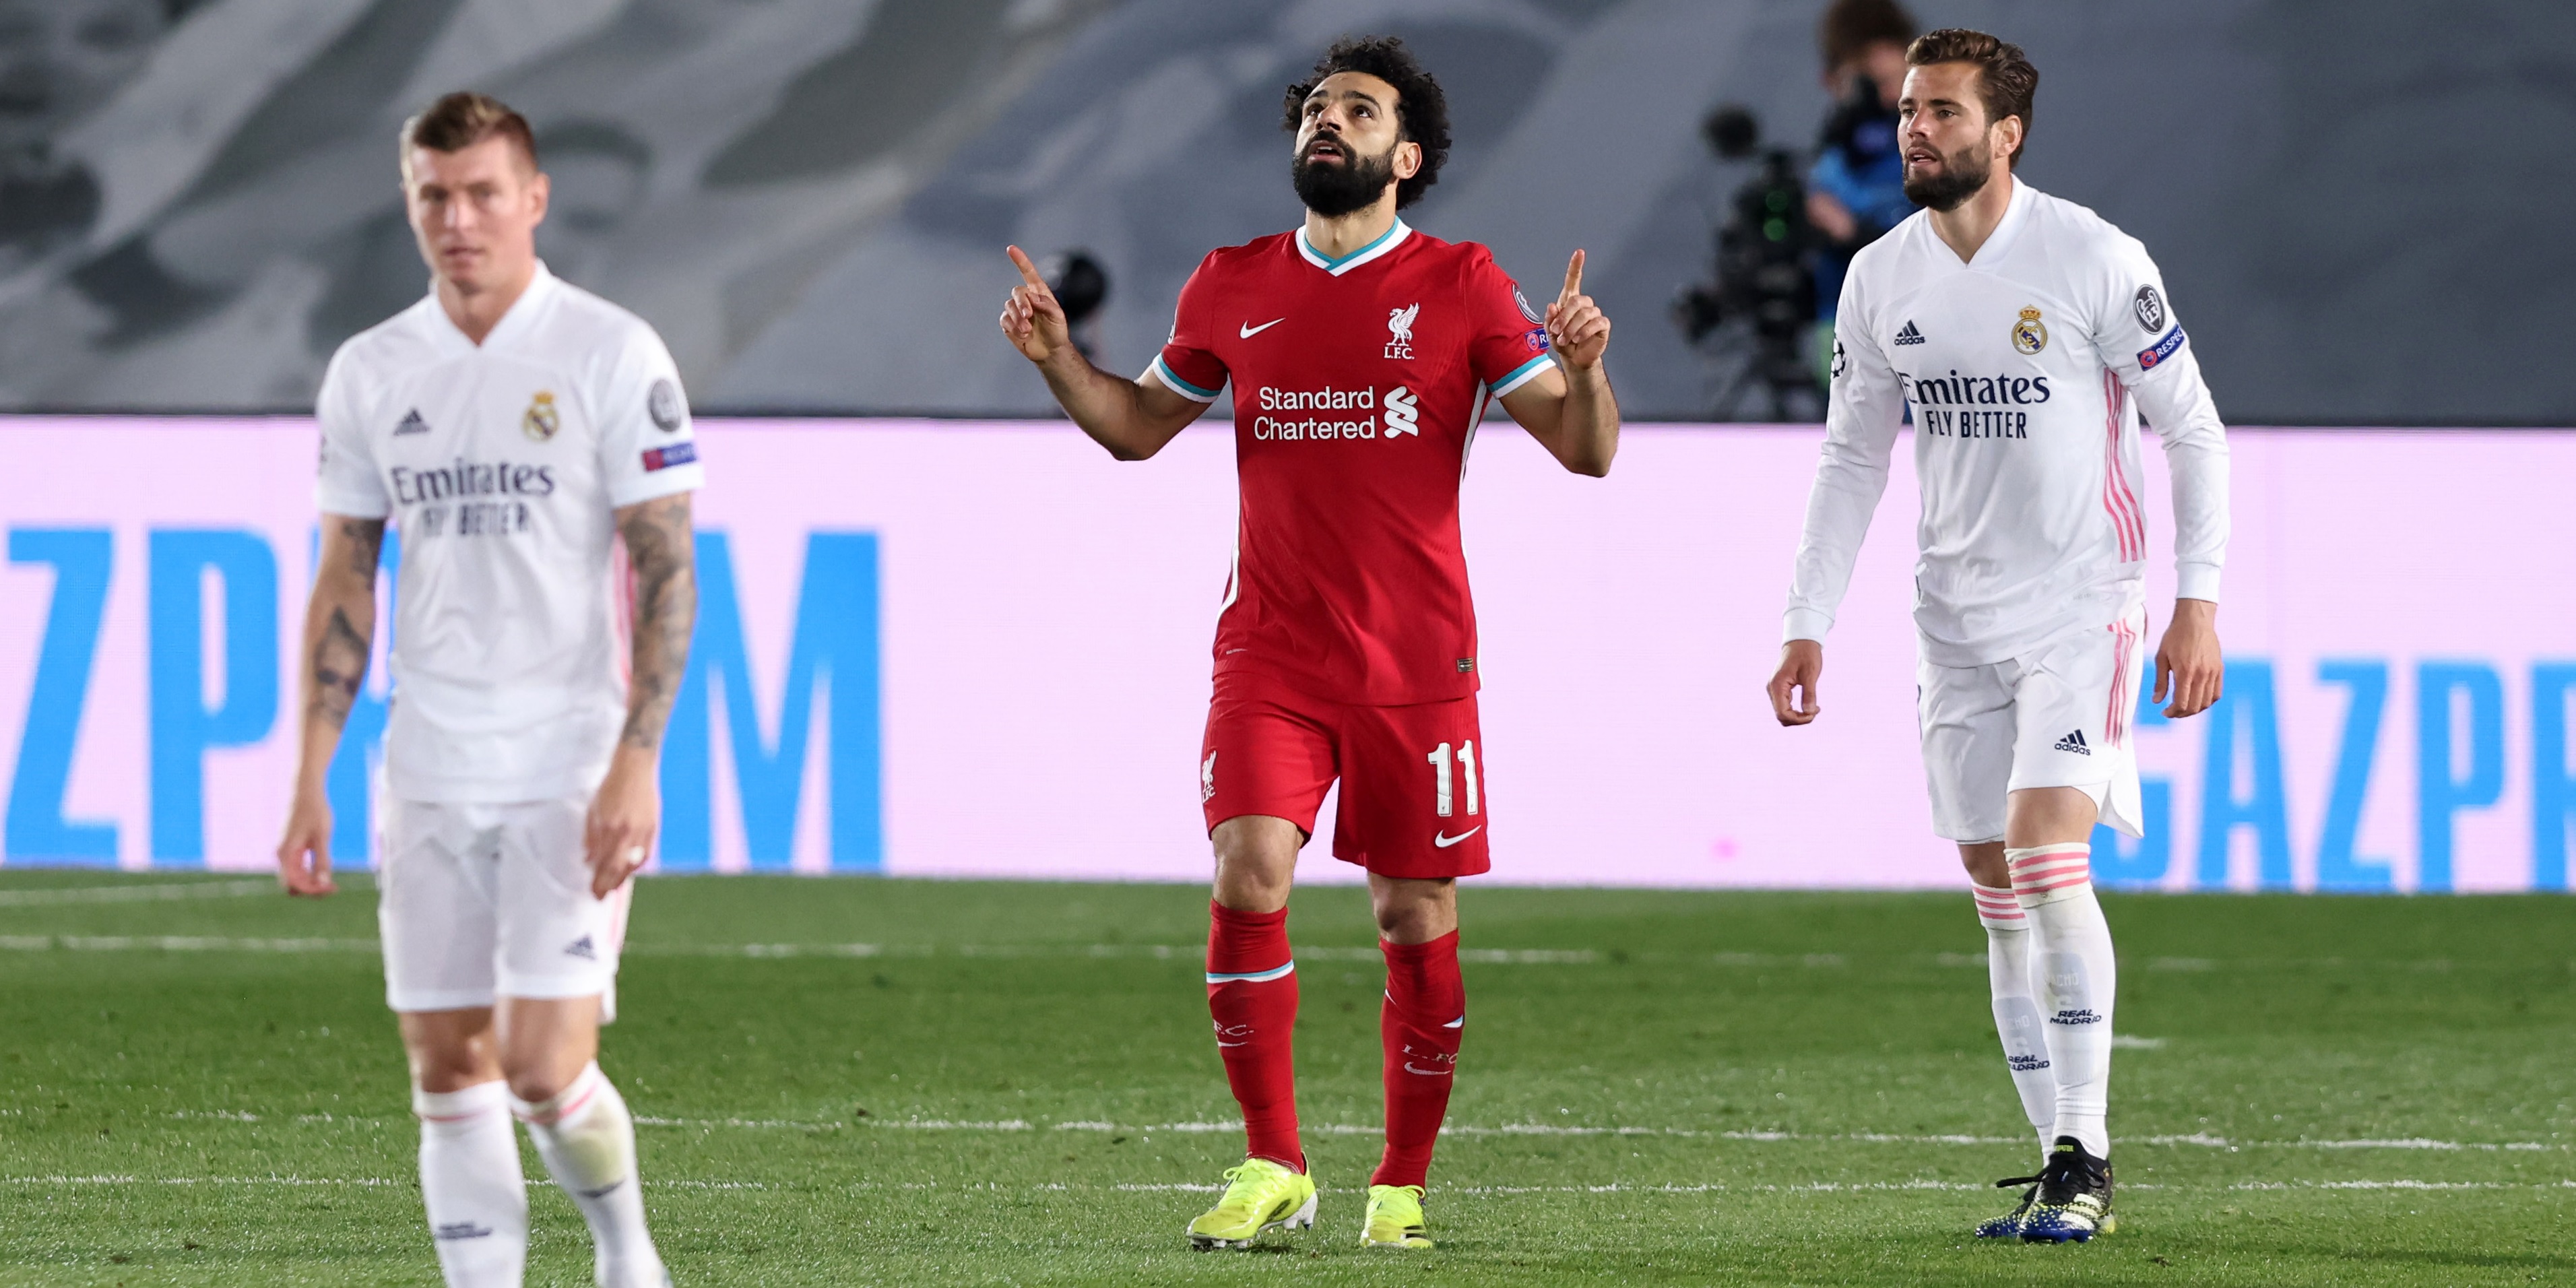 Fabio Borini claims keeping €110m Liverpool star is ‘not the key to keep winning trophies’; compares situation to Philippe Coutinho’s